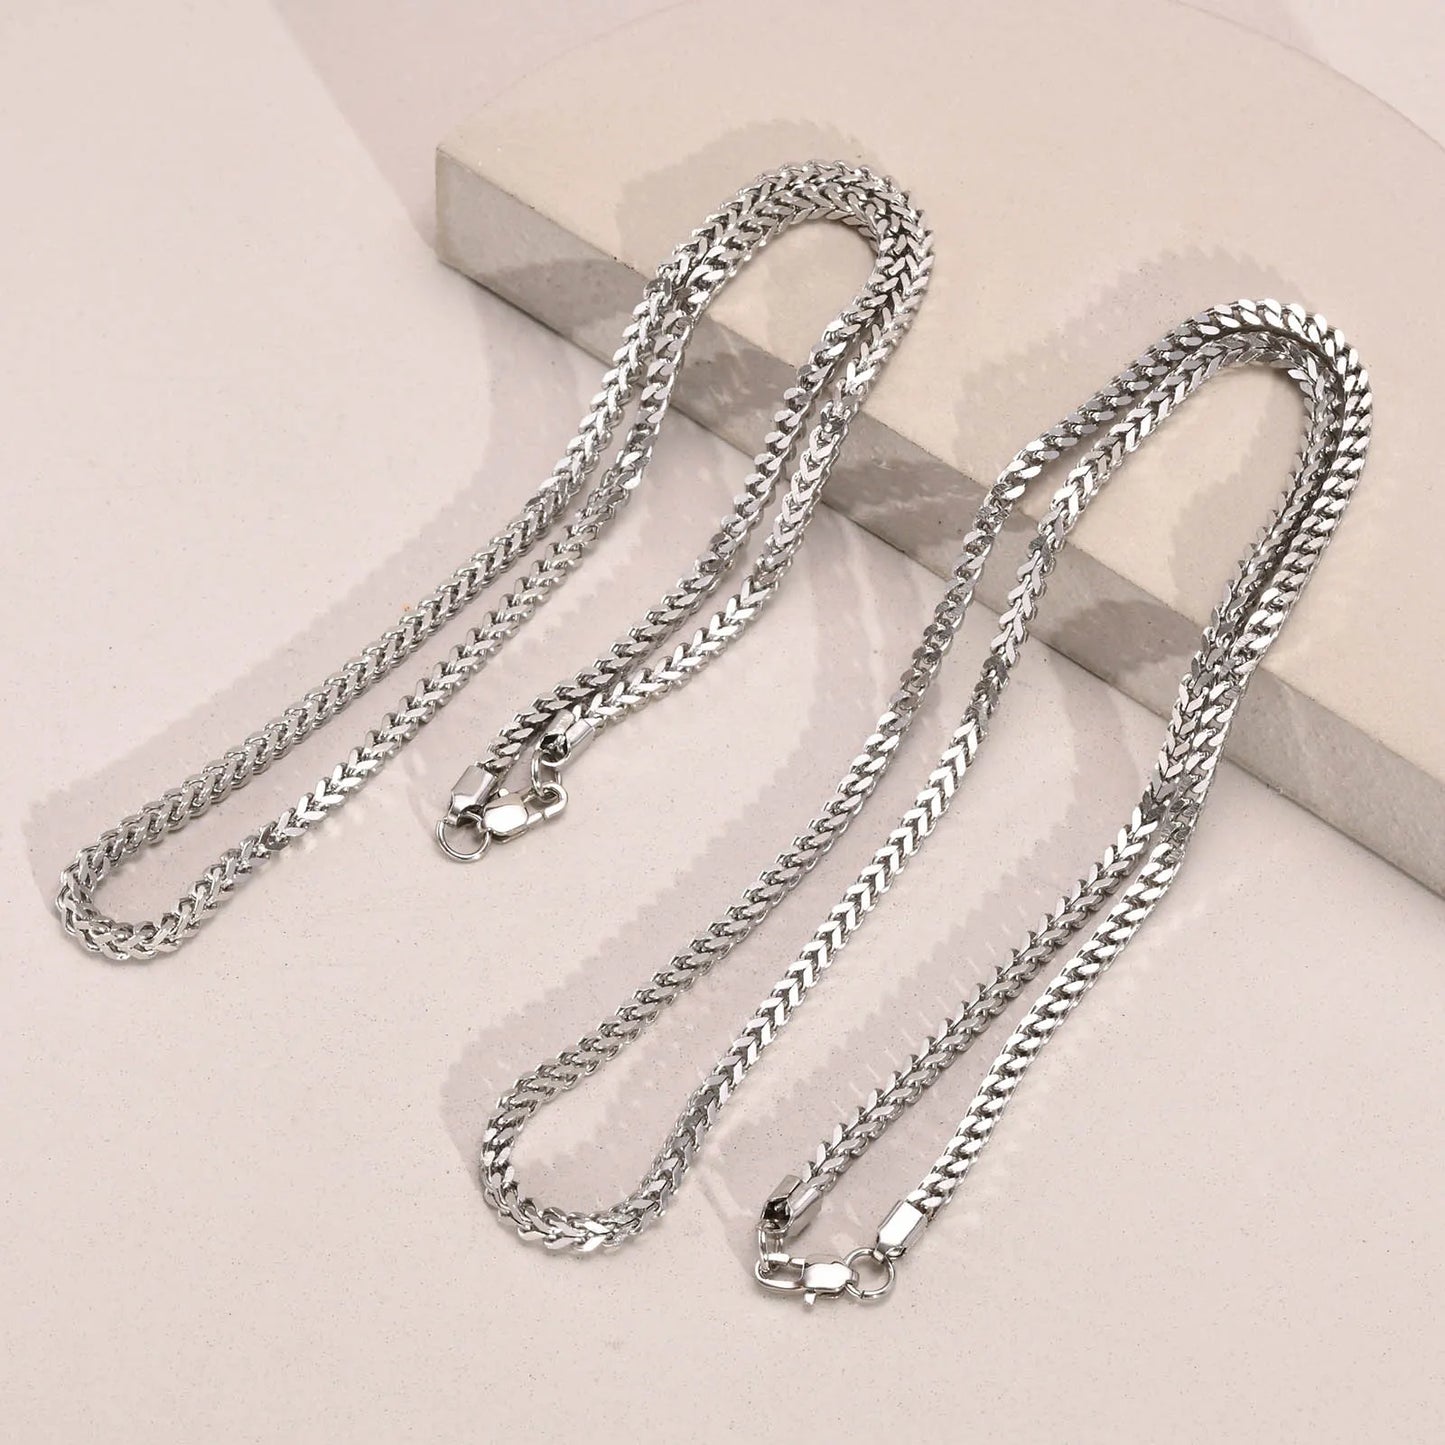 Franco Chain Necklace 3mm Thick Stainless Steel Necklace